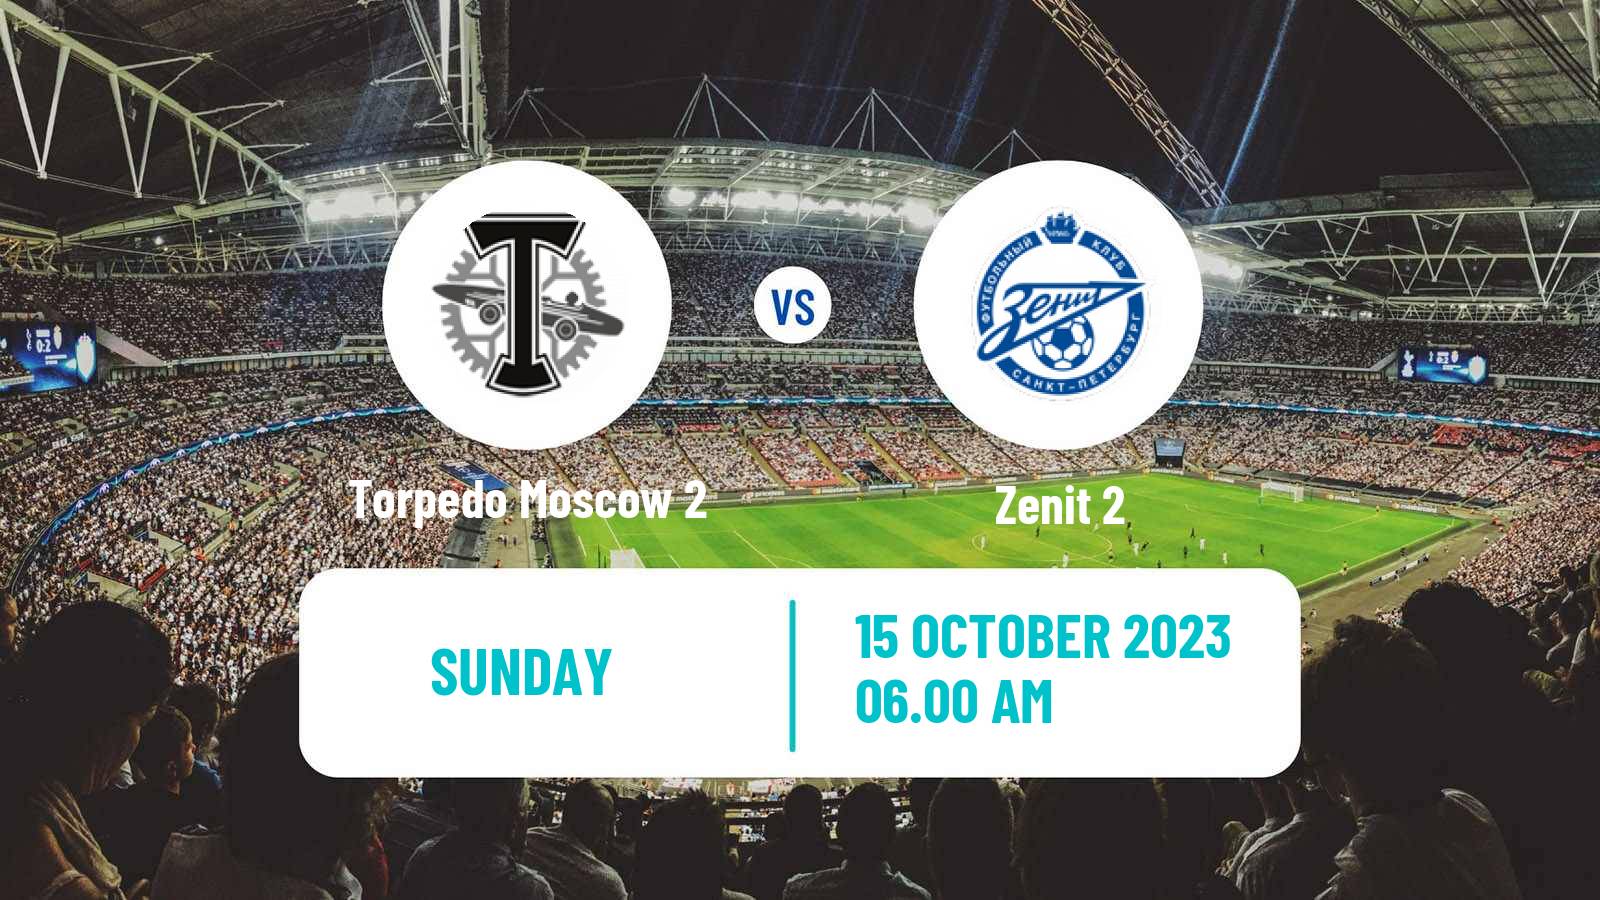 Soccer FNL 2 Division B Group 2 Torpedo Moscow 2 - Zenit 2